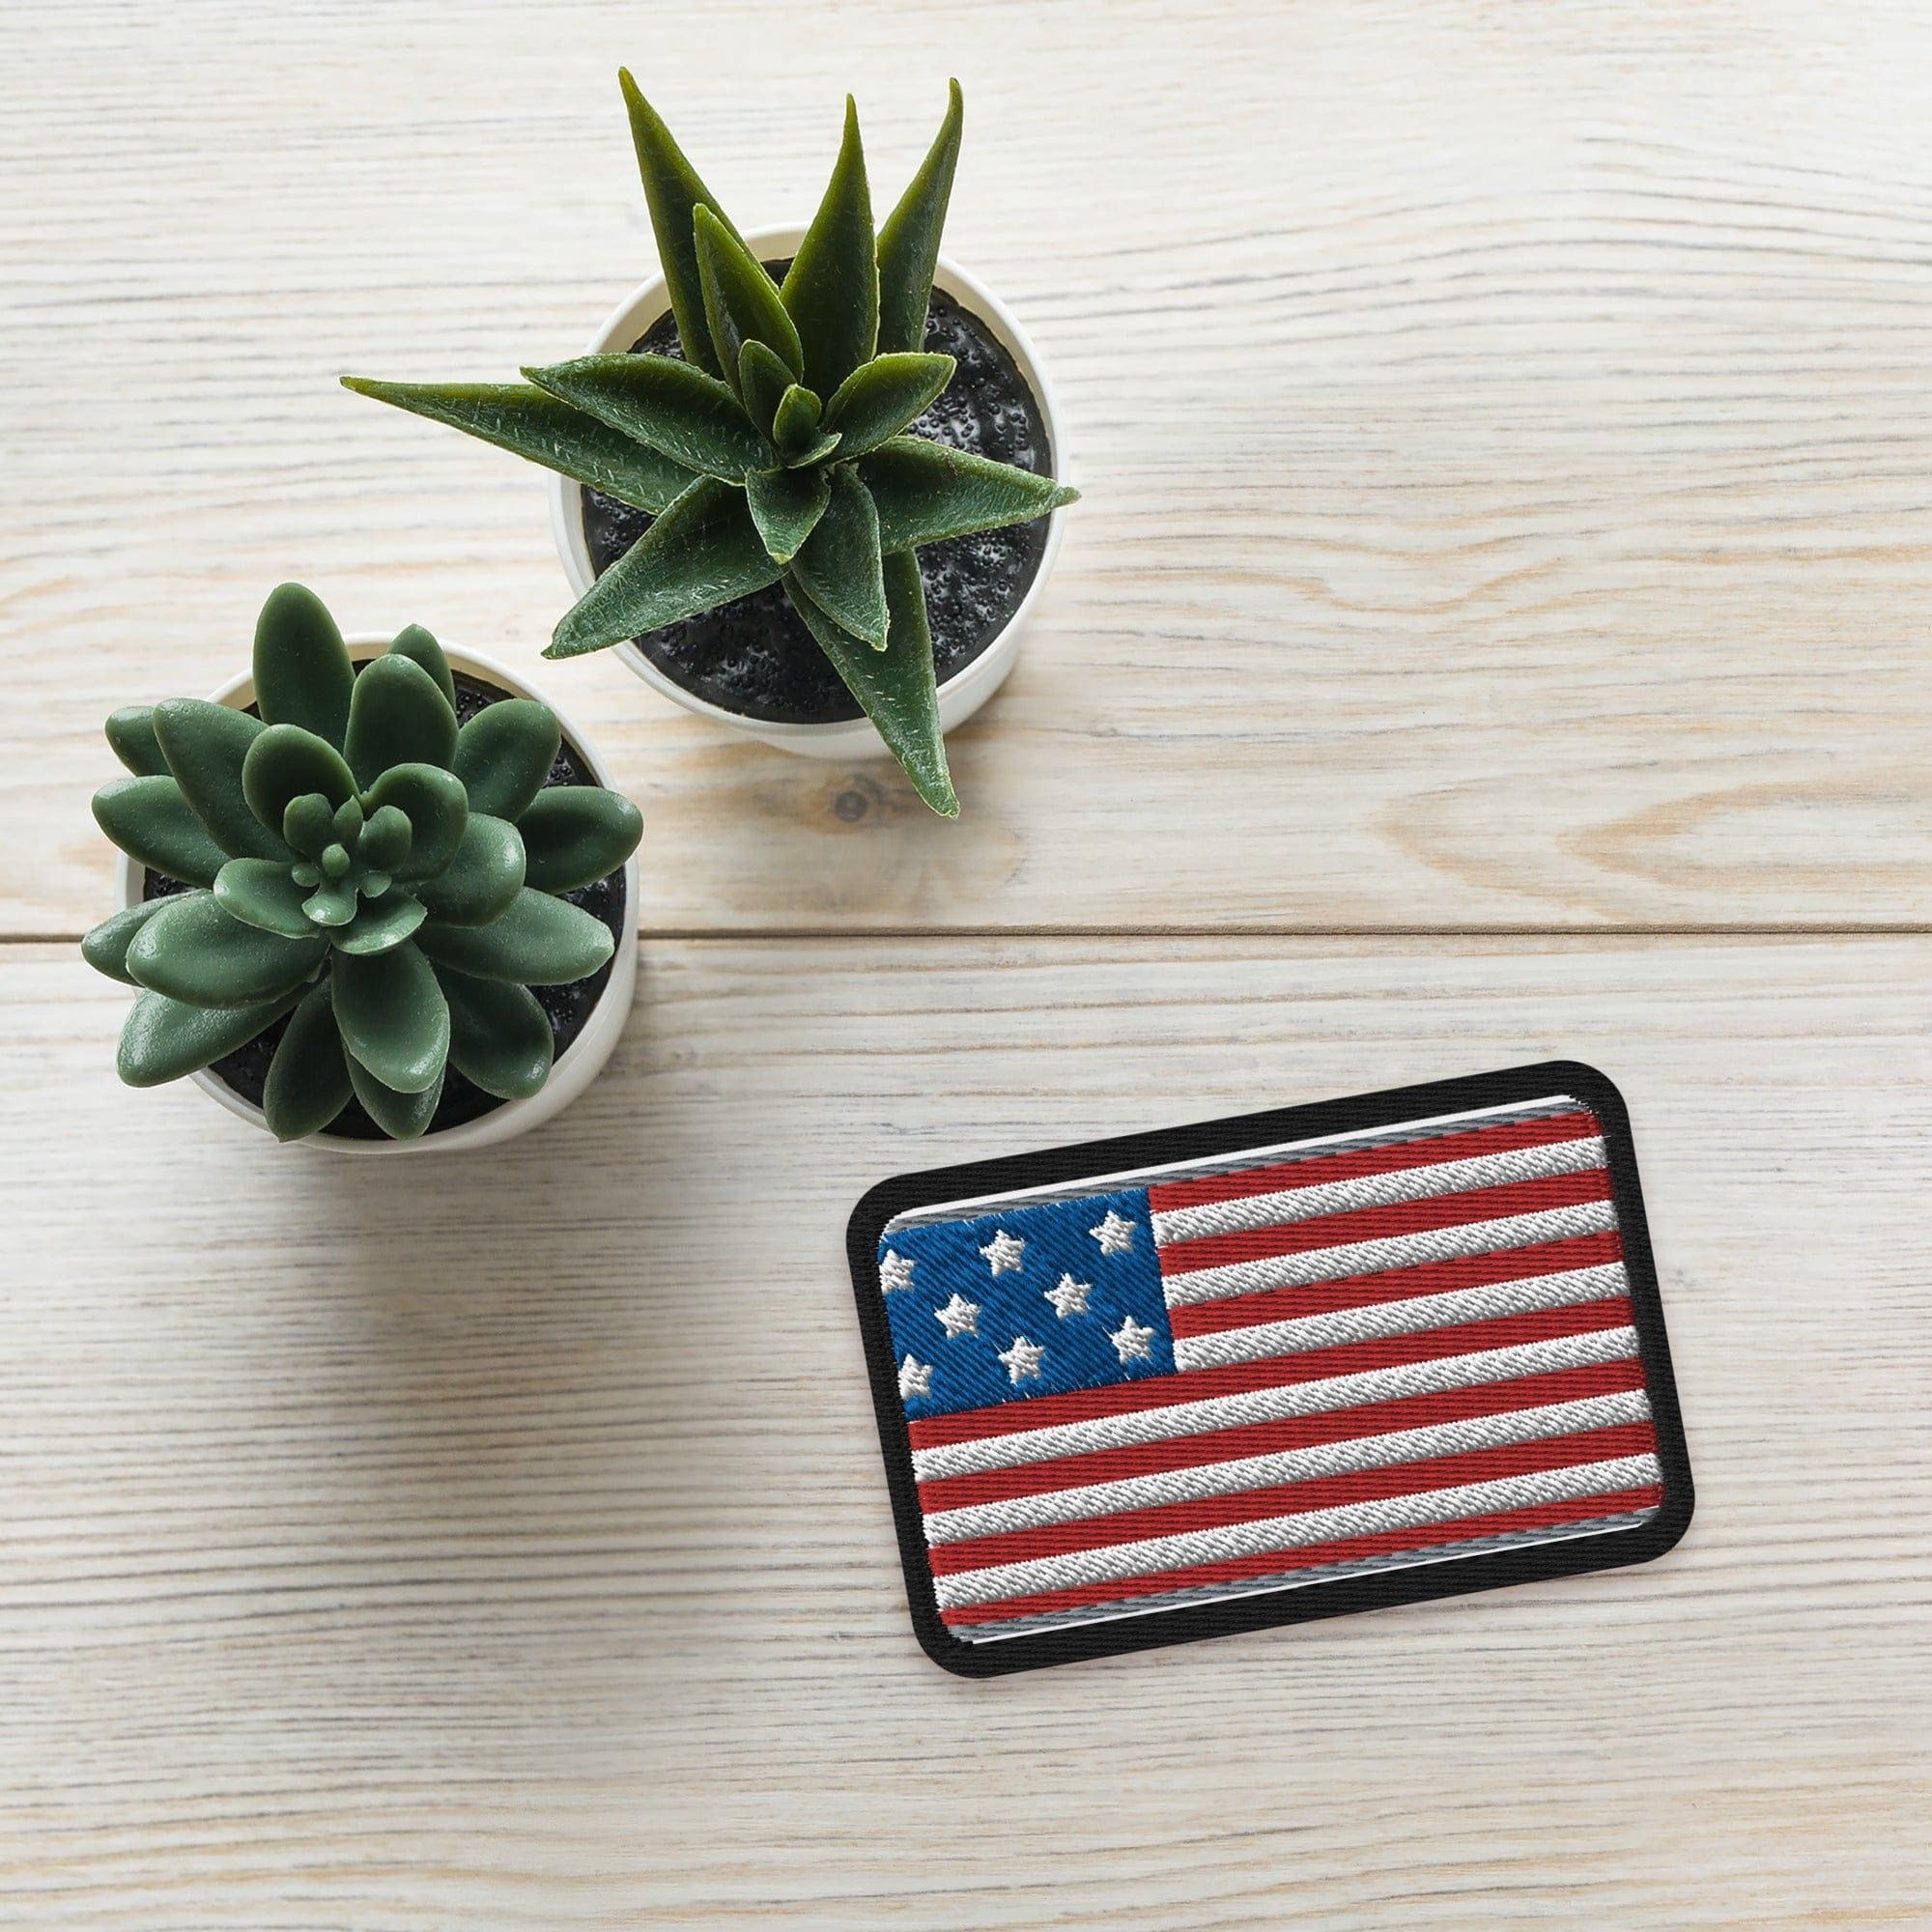 Stars & Stripes Circles: American Flag Design Circular Patches by Twin Dollar - TWIN DOLLAR